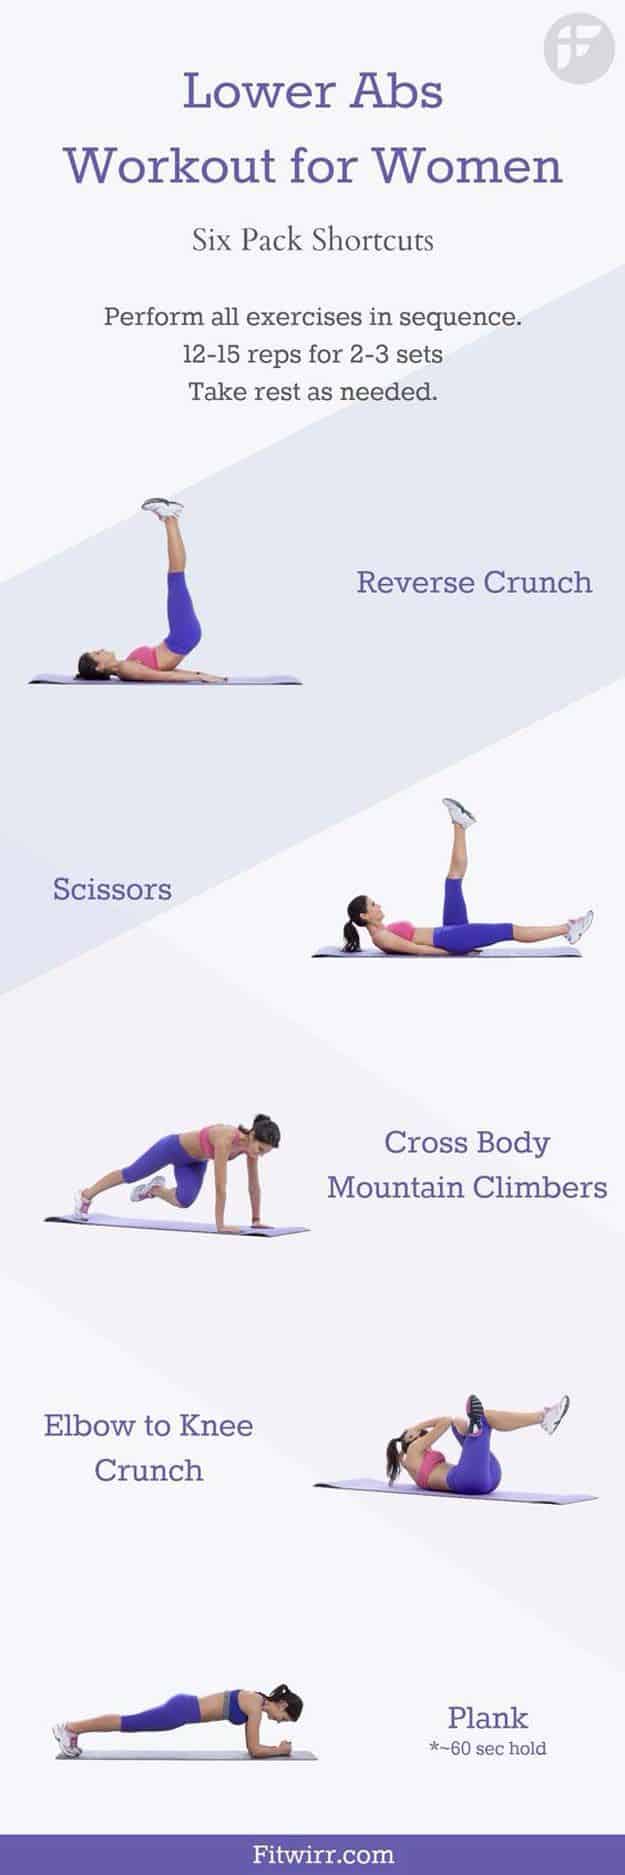 Best Exercises for 2018 - Best Lower Abs Workout for Women - Easy At Home Exercises - Quick Exercise Tutorials to Try at Lunch Break - Ways To Get In Shape - Butt, Abs, Arms, Legs, Thighs, Tummy 